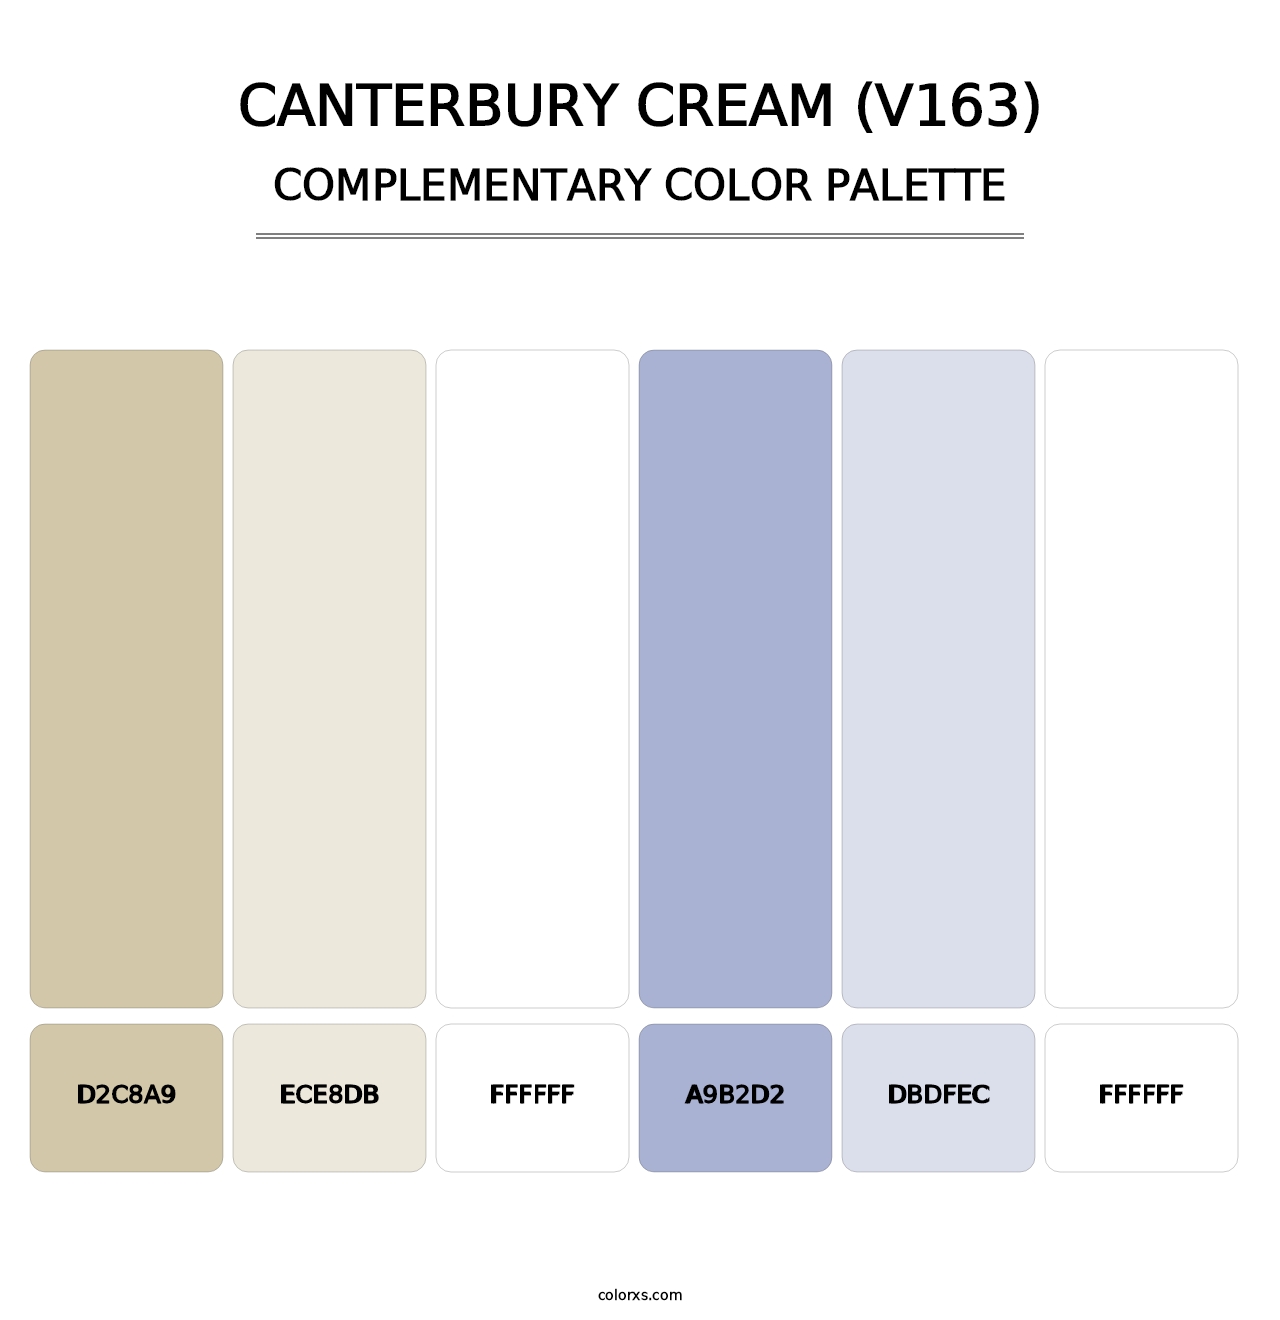 Canterbury Cream (V163) - Complementary Color Palette